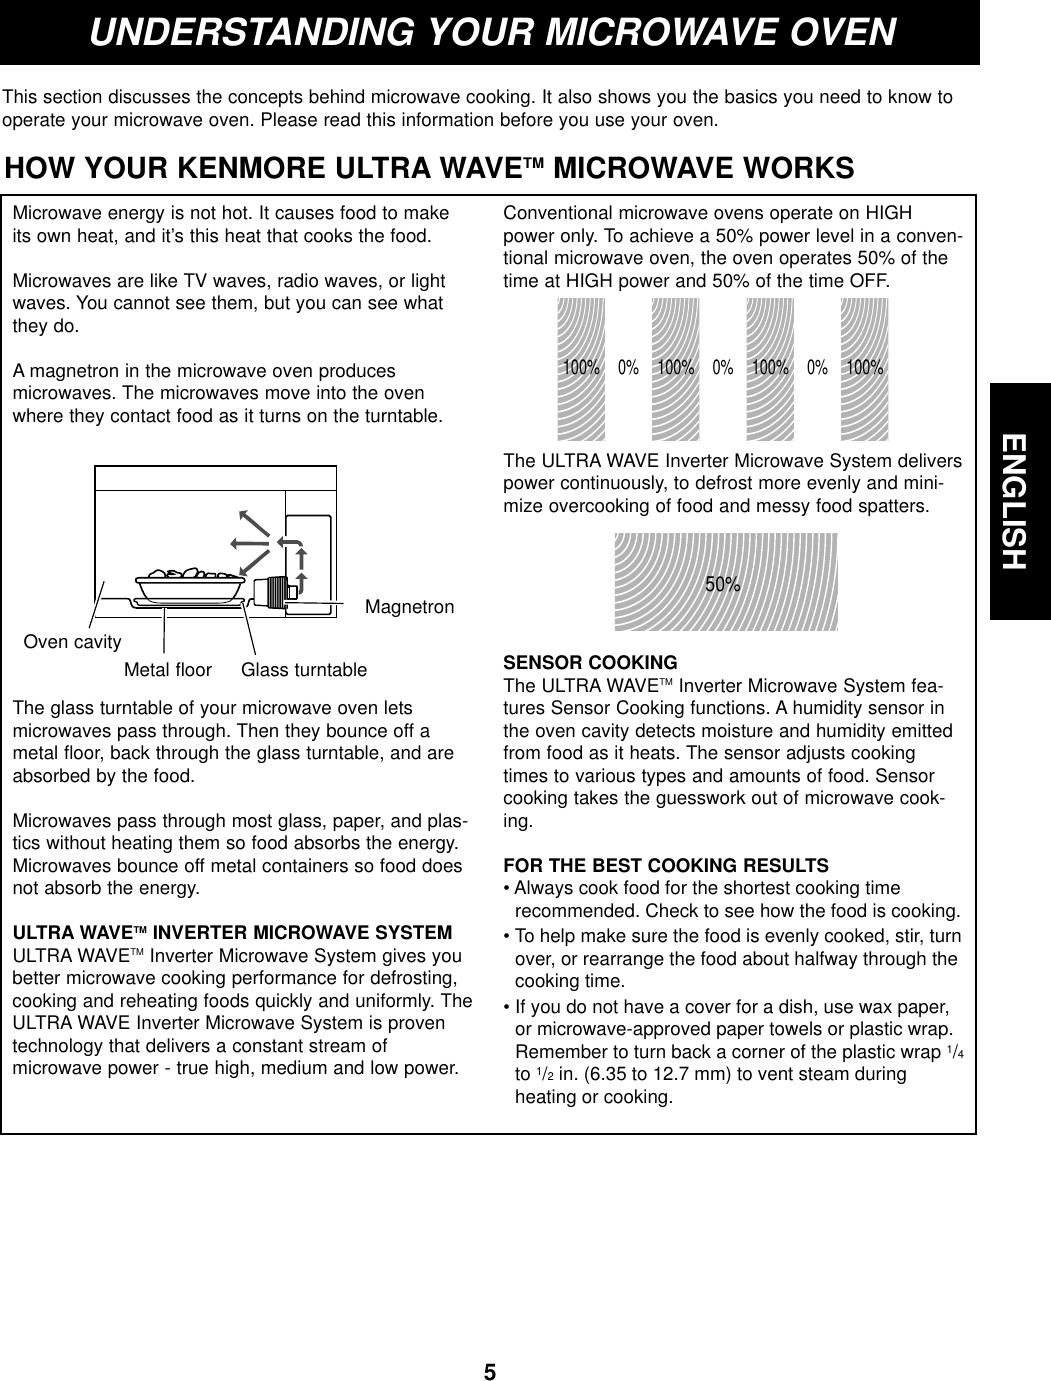 ENGLISH5UNDERSTANDING YOUR MICROWAVE OVENHOW YOUR KENMORE ULTRA WAVETM MICROWAVE WORKSThis section discusses the concepts behind microwave cooking. It also shows you the basics you need to know tooperate your microwave oven. Please read this information before you use your oven.Microwave energy is not hot. It causes food to makeits own heat, and it’s this heat that cooks the food.Microwaves are like TV waves, radio waves, or lightwaves. You cannot see them, but you can see whatthey do.A magnetron in the microwave oven producesmicrowaves. The microwaves move into the ovenwhere they contact food as it turns on the turntable.The glass turntable of your microwave oven letsmicrowaves pass through. Then they bounce off ametal floor, back through the glass turntable, and areabsorbed by the food.Microwaves pass through most glass, paper, and plas-tics without heating them so food absorbs the energy.Microwaves bounce off metal containers so food doesnot absorb the energy.ULTRA WAVETM INVERTER MICROWAVE SYSTEMULTRA WAVETM Inverter Microwave System gives youbetter microwave cooking performance for defrosting,cooking and reheating foods quickly and uniformly. TheULTRA WAVE Inverter Microwave System is proventechnology that delivers a constant stream ofmicrowave power - true high, medium and low power.Conventional microwave ovens operate on HIGHpower only. To achieve a 50% power level in a conven-tional microwave oven, the oven operates 50% of thetime at HIGH power and 50% of the time OFF.The ULTRA WAVE Inverter Microwave System deliverspower continuously, to defrost more evenly and mini-mize overcooking of food and messy food spatters.SENSOR COOKING The ULTRA WAVETM Inverter Microwave System fea-tures Sensor Cooking functions. A humidity sensor inthe oven cavity detects moisture and humidity emittedfrom food as it heats. The sensor adjusts cookingtimes to various types and amounts of food. Sensorcooking takes the guesswork out of microwave cook-ing.FOR THE BEST COOKING RESULTS • Always cook food for the shortest cooking timerecommended. Check to see how the food is cooking.• To help make sure the food is evenly cooked, stir, turnover, or rearrange the food about halfway through thecooking time.• If you do not have a cover for a dish, use wax paper,or microwave-approved paper towels or plastic wrap.Remember to turn back a corner of the plastic wrap 1/4to 1/2in. (6.35 to 12.7 mm) to vent steam duringheating or cooking.MagnetronOven cavityGlass turntableMetal floor100% 0% 100%50%0% 100% 0% 100%